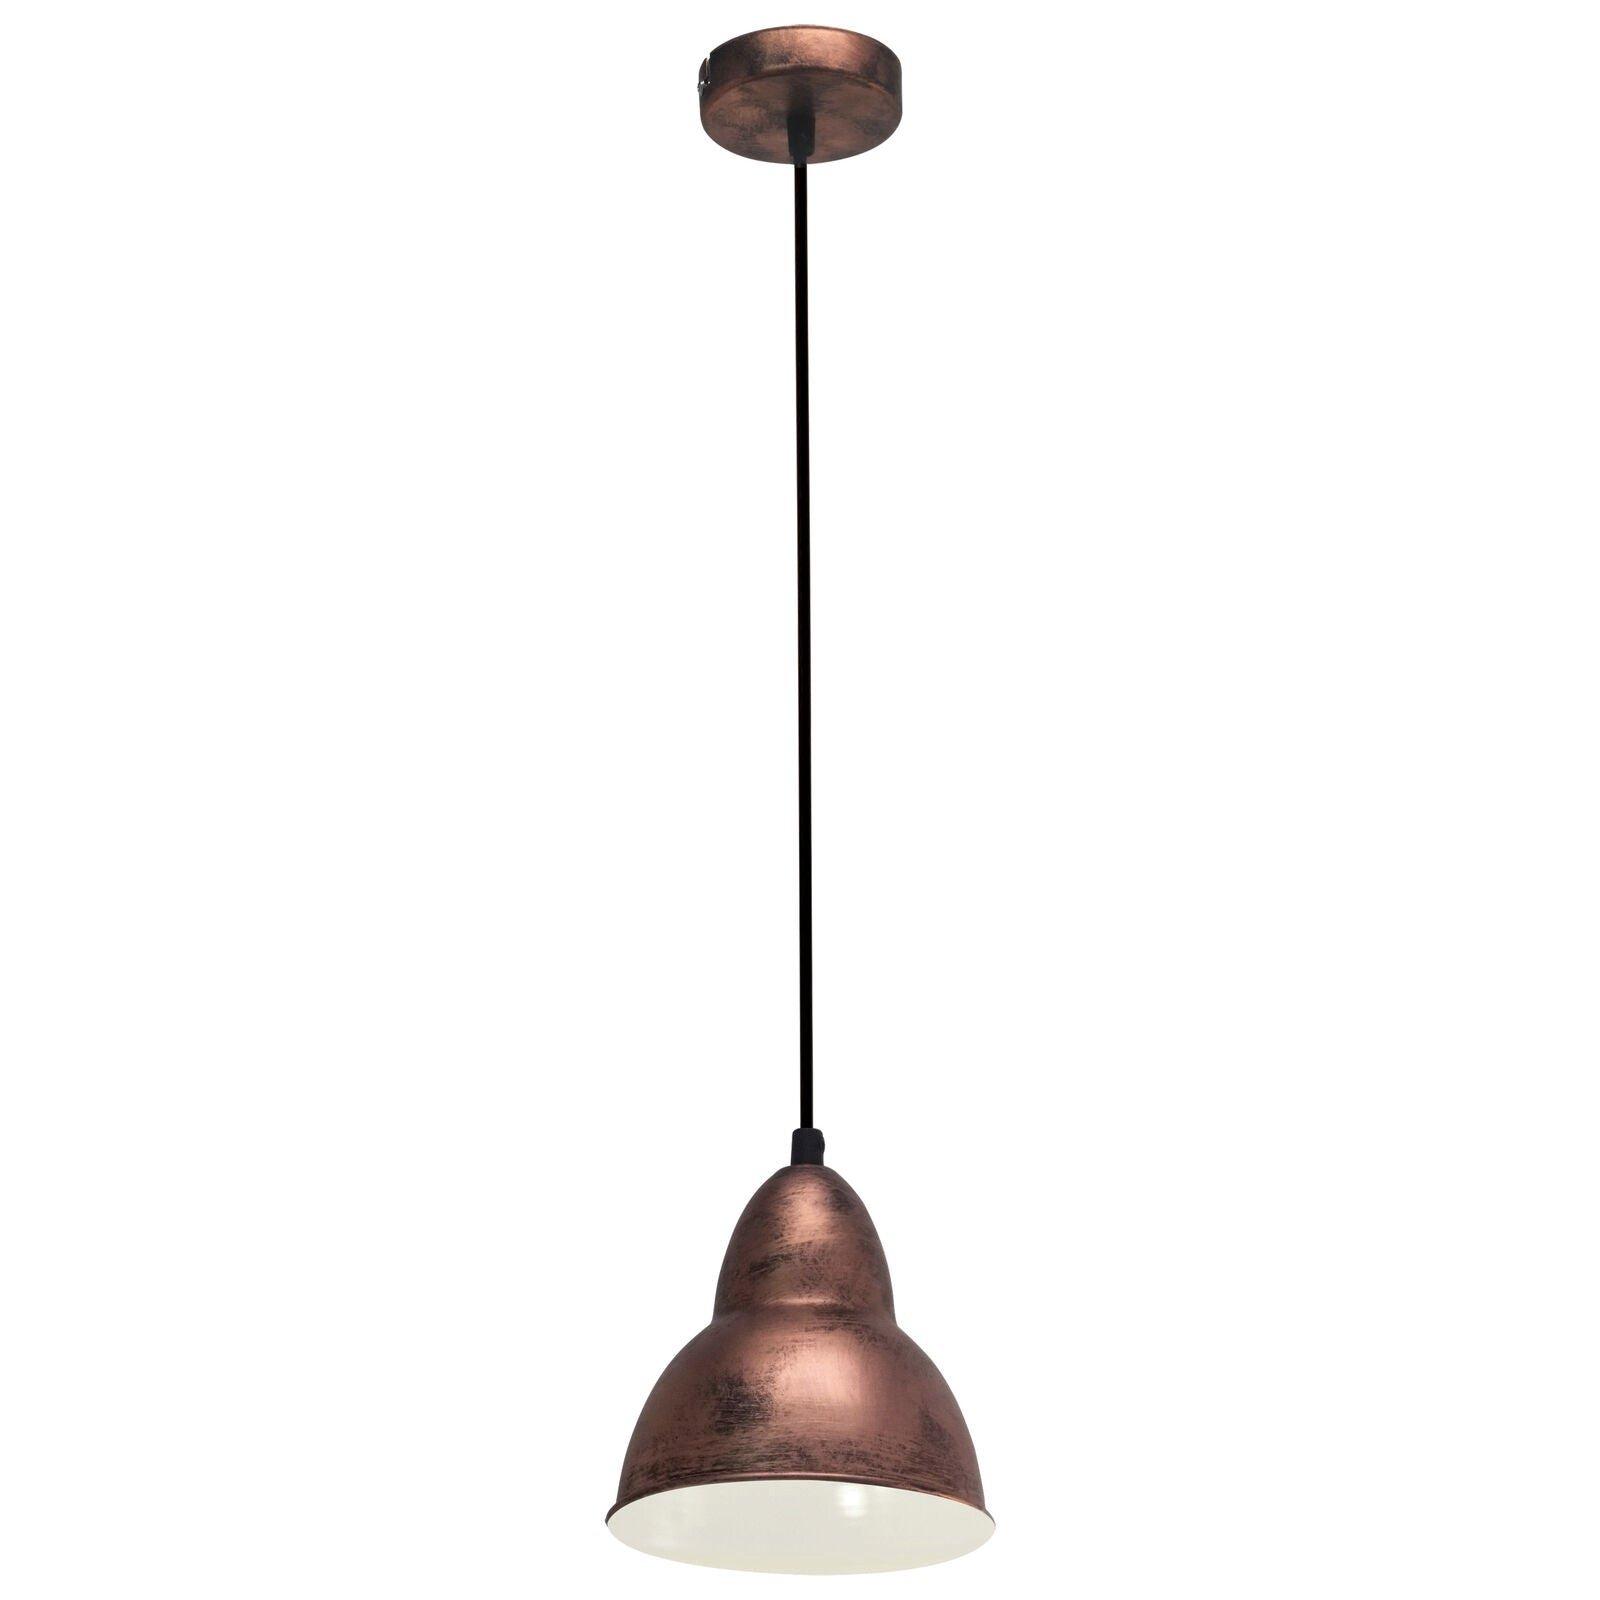 Hanging Ceiling Pendant Light Antique Copper Industrial Shade 1 x 40W E27 Bulb